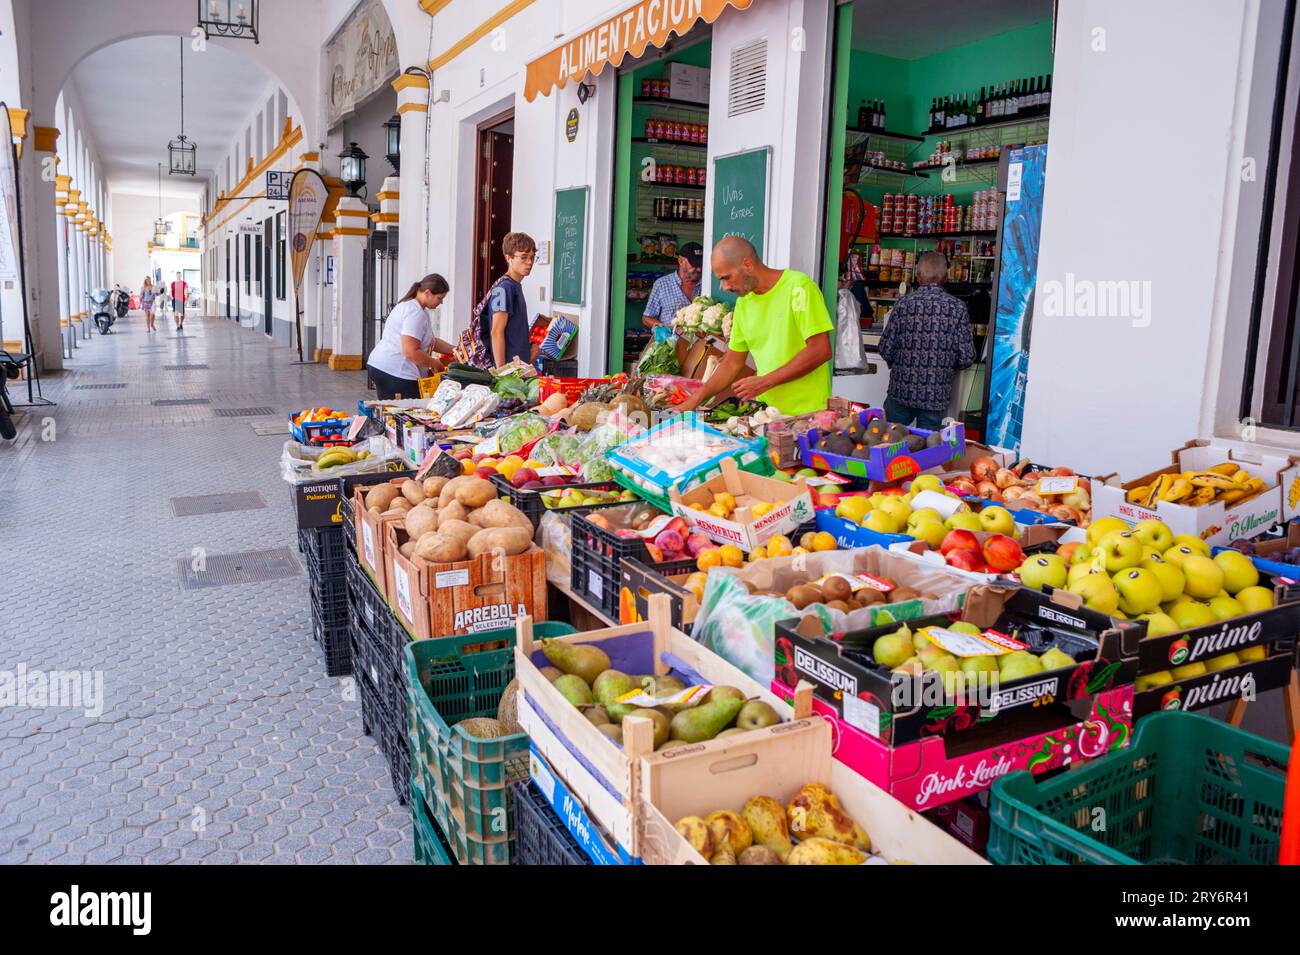 Seville, Spain, Small Crowd People, Shopping in Public Food Market, 'El Arenal Market',  in Old Town Center, Local Grocery Shop Display Stock Photo